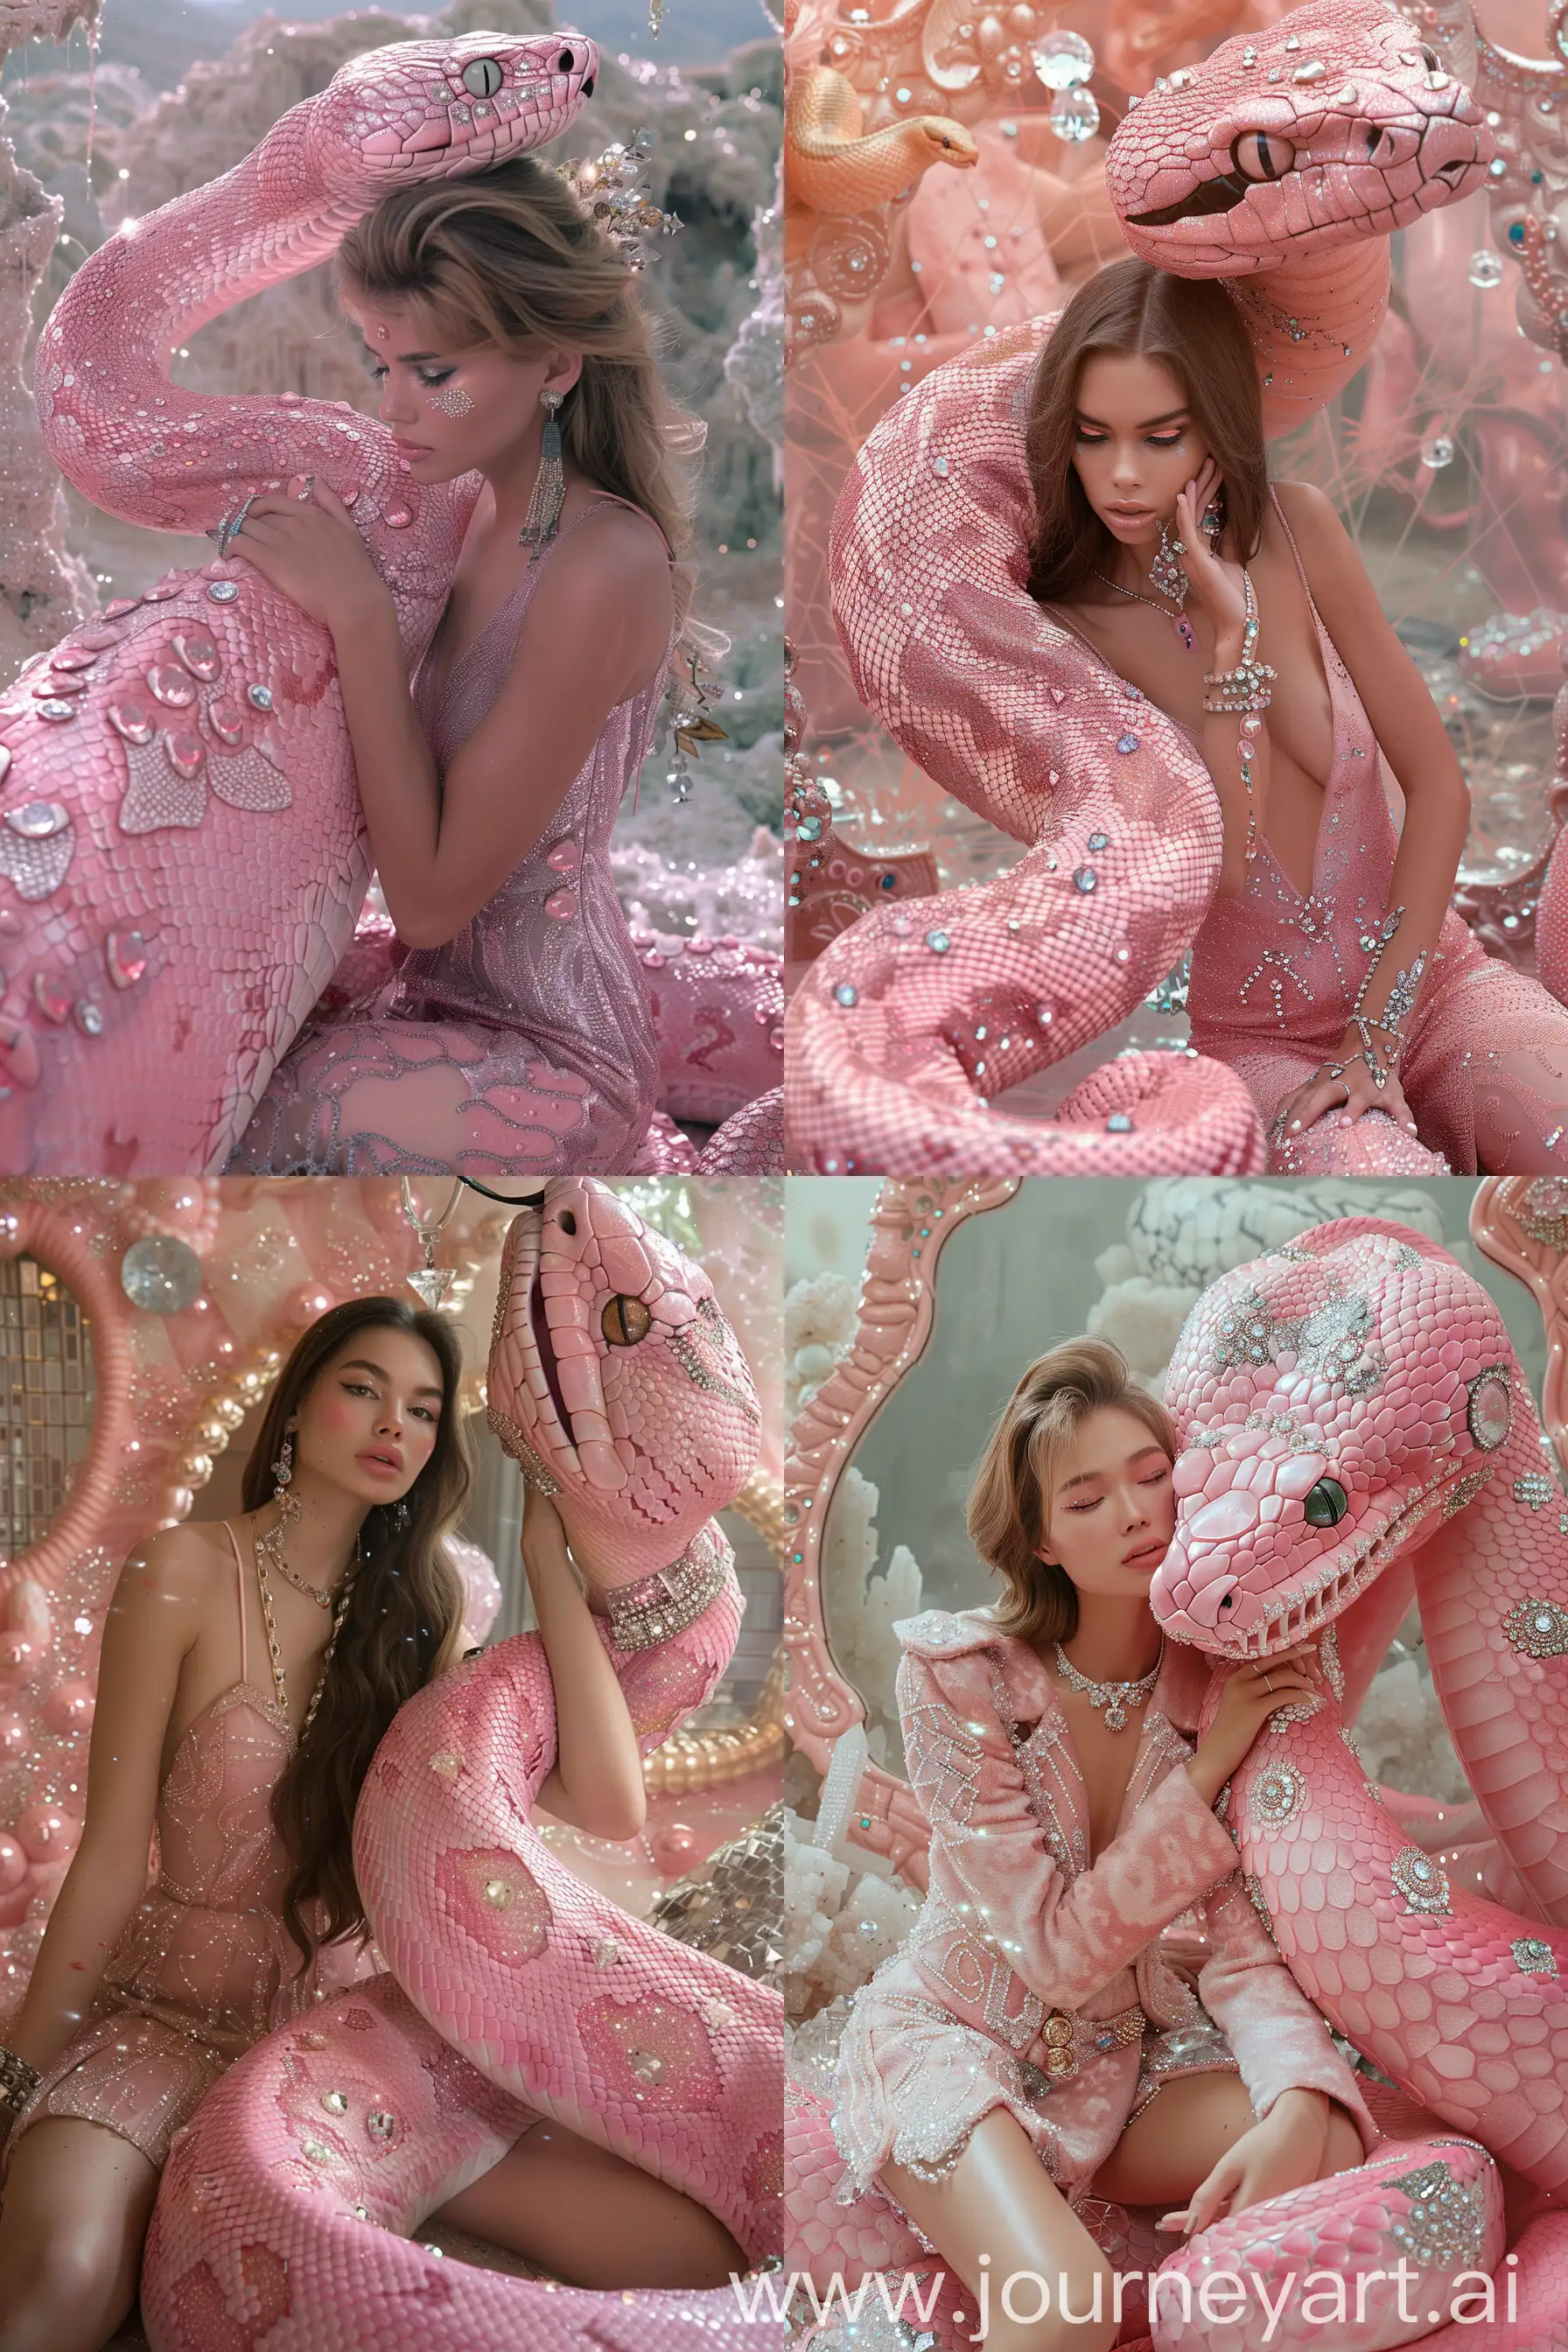 Enchanting-Encounter-Woman-Embracing-Giant-Pink-Snake-in-Fantasy-Realm